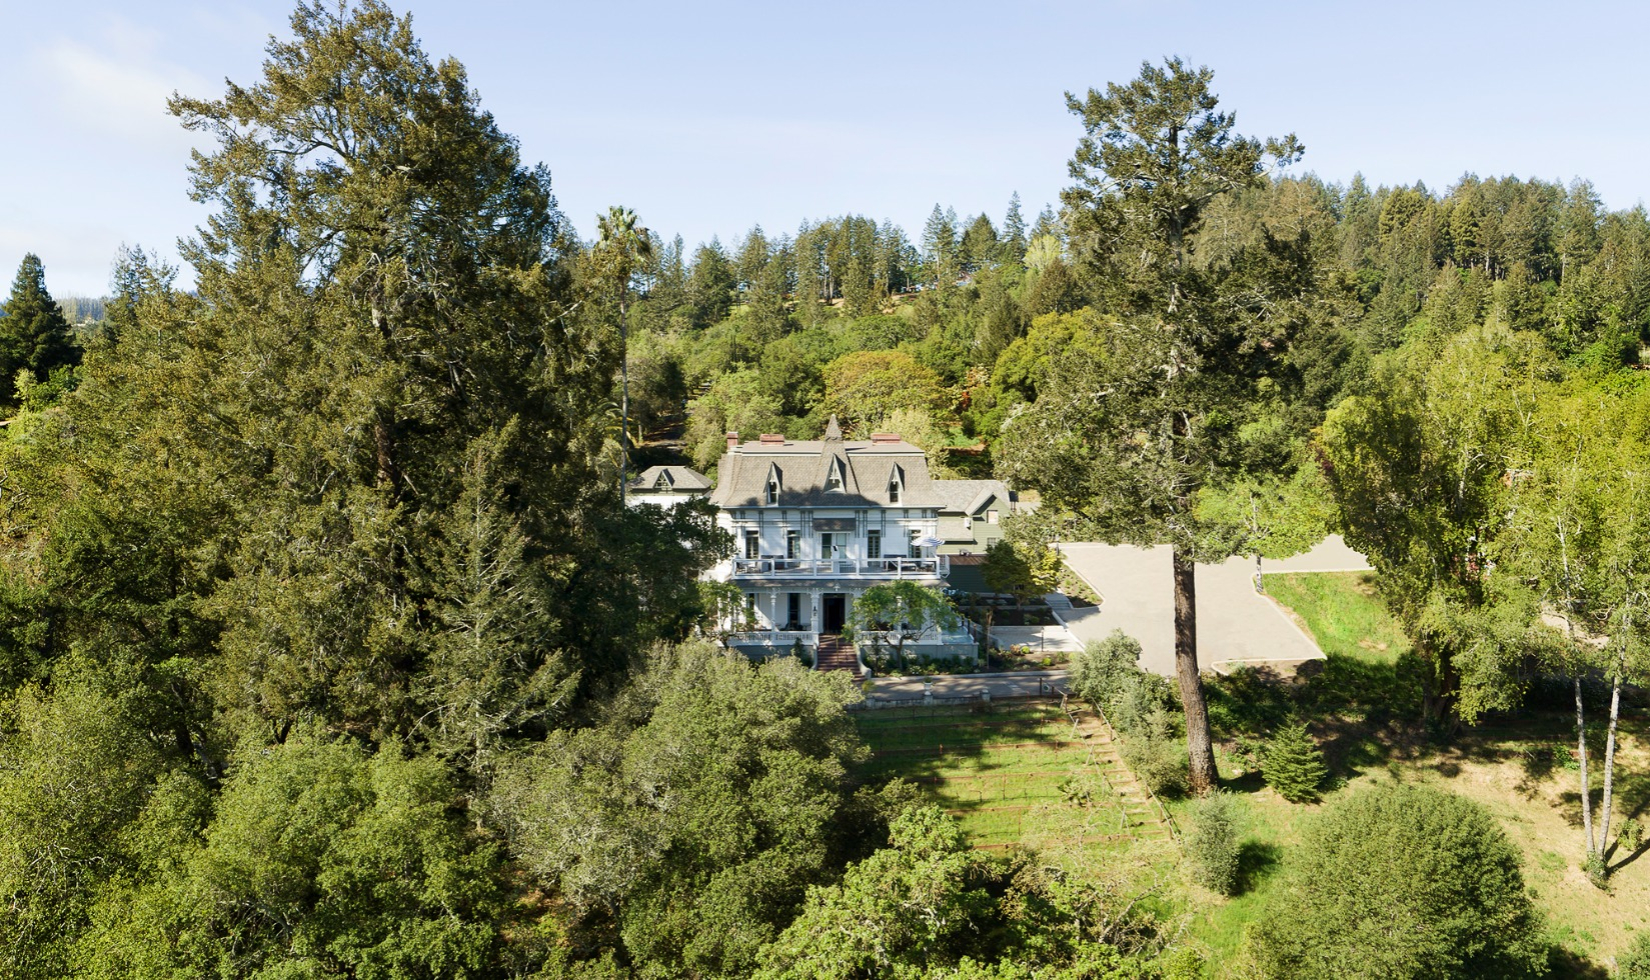 Aerial drone image of white Victorian mansion surrounded by green yards and forest.